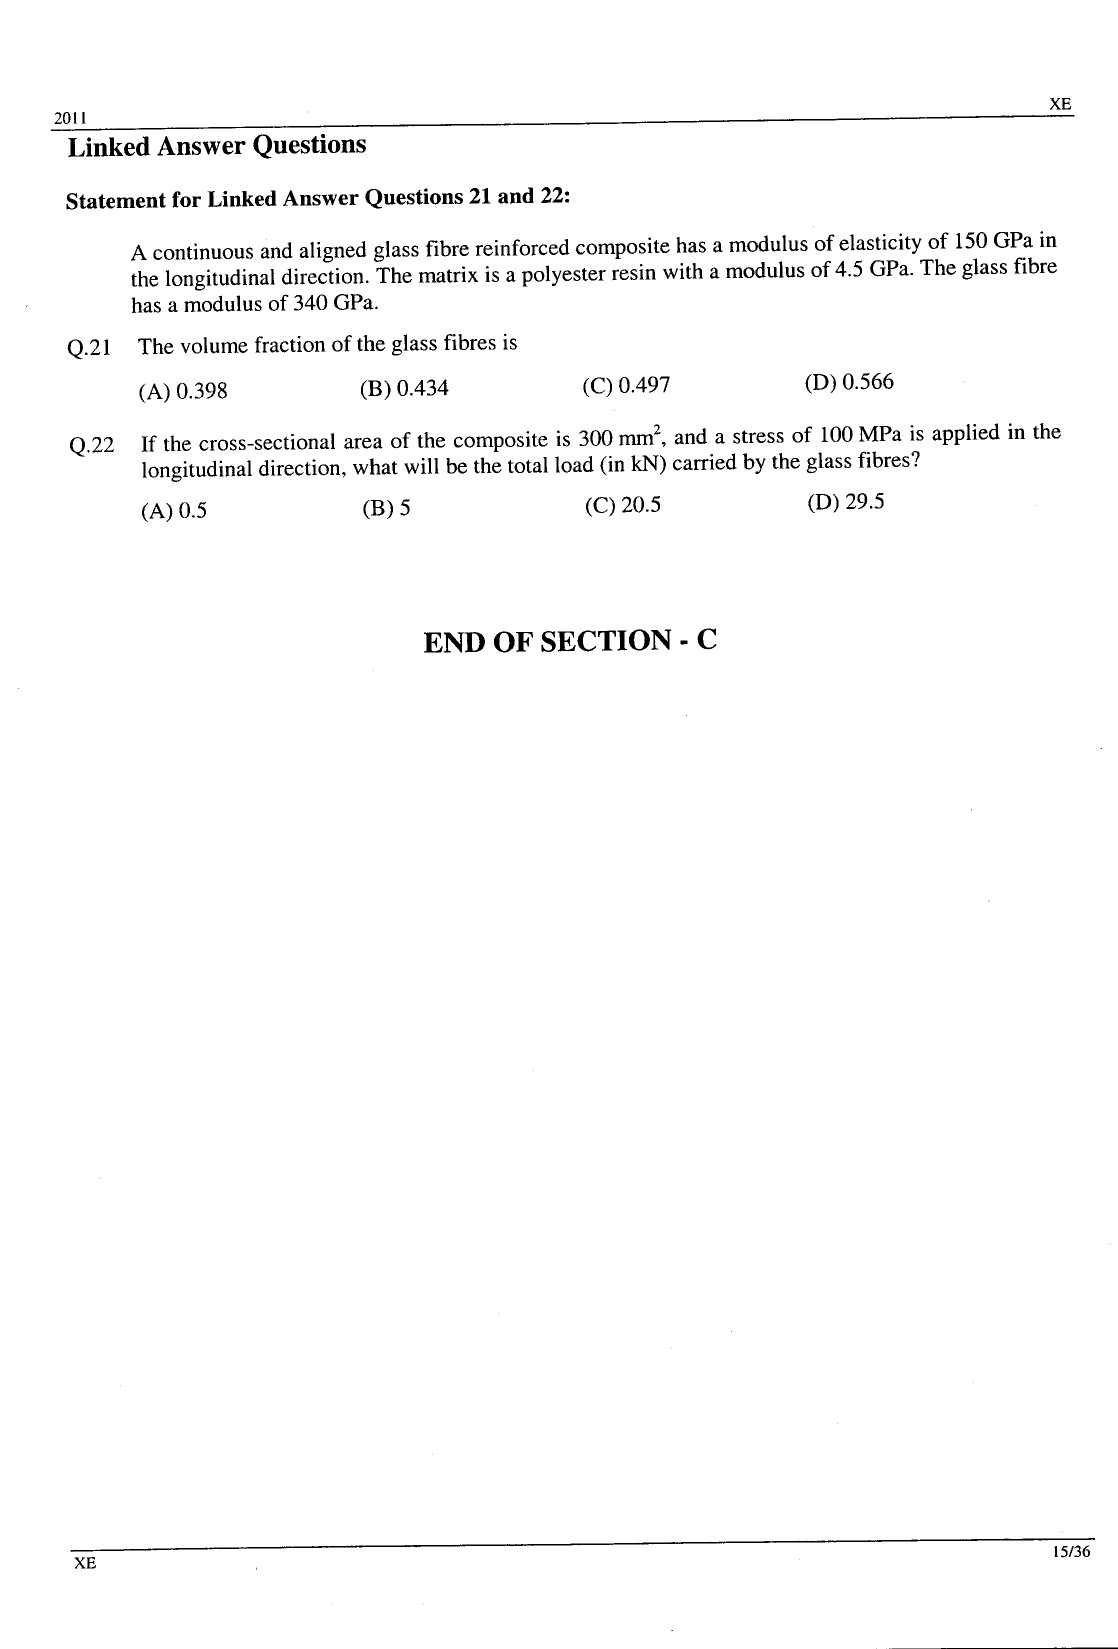 GATE Exam Question Paper 2011 Engineering Sciences 15